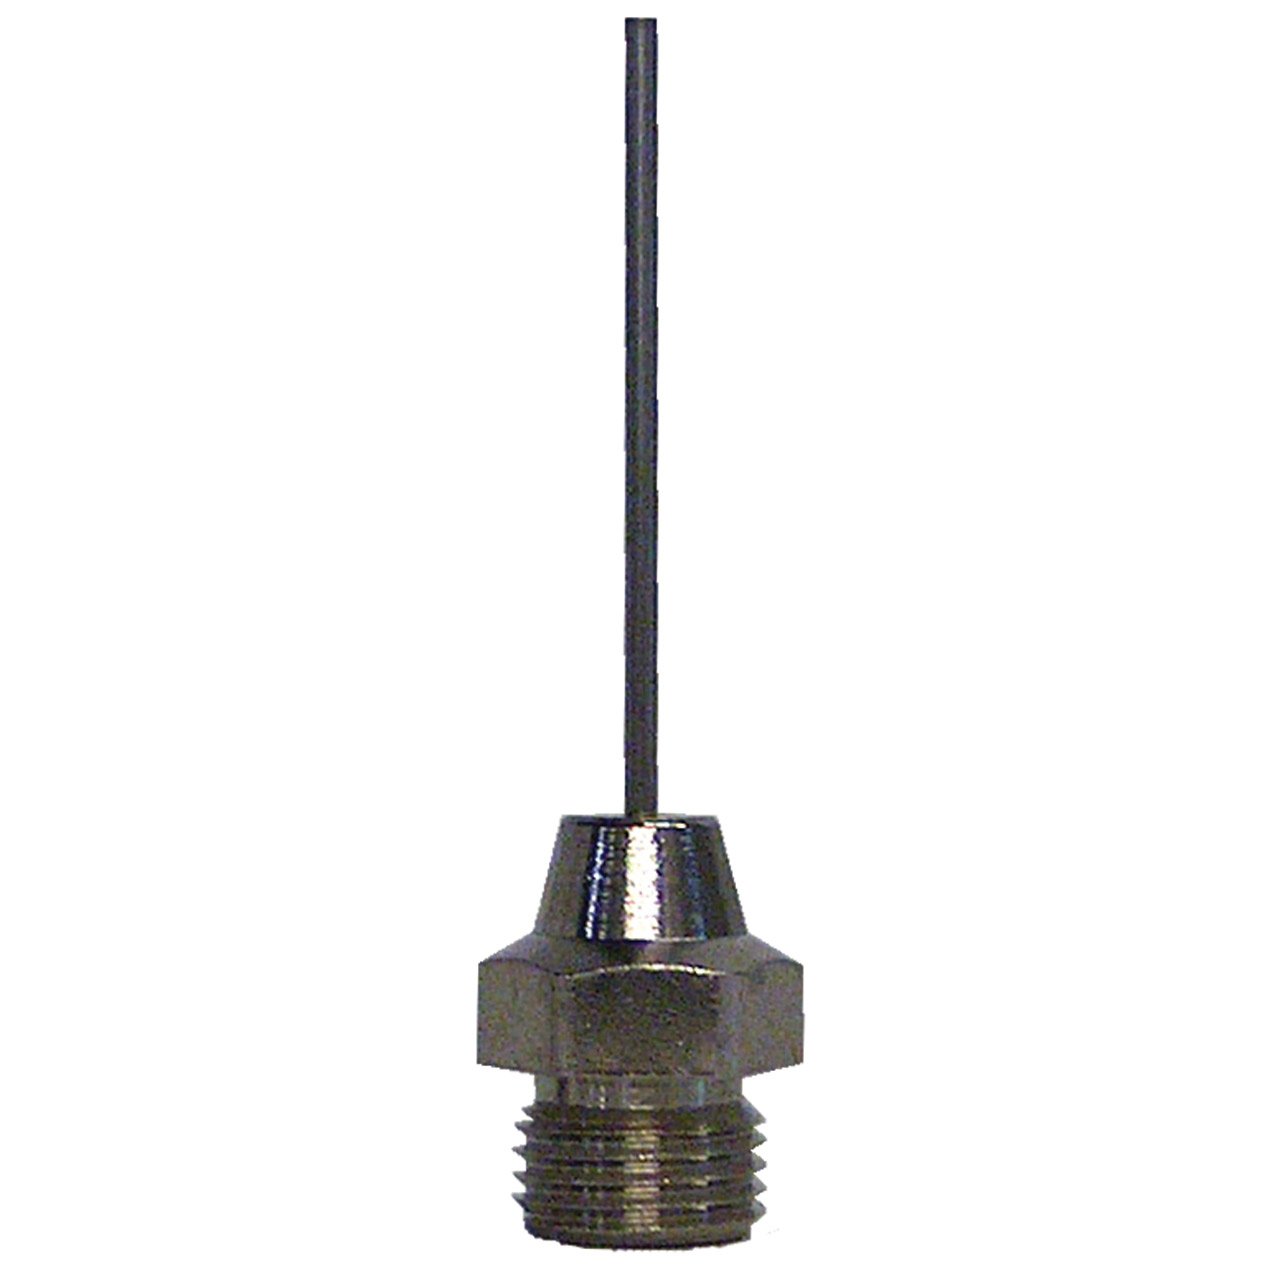 Replacement Needle 0.05 x 1 3/16